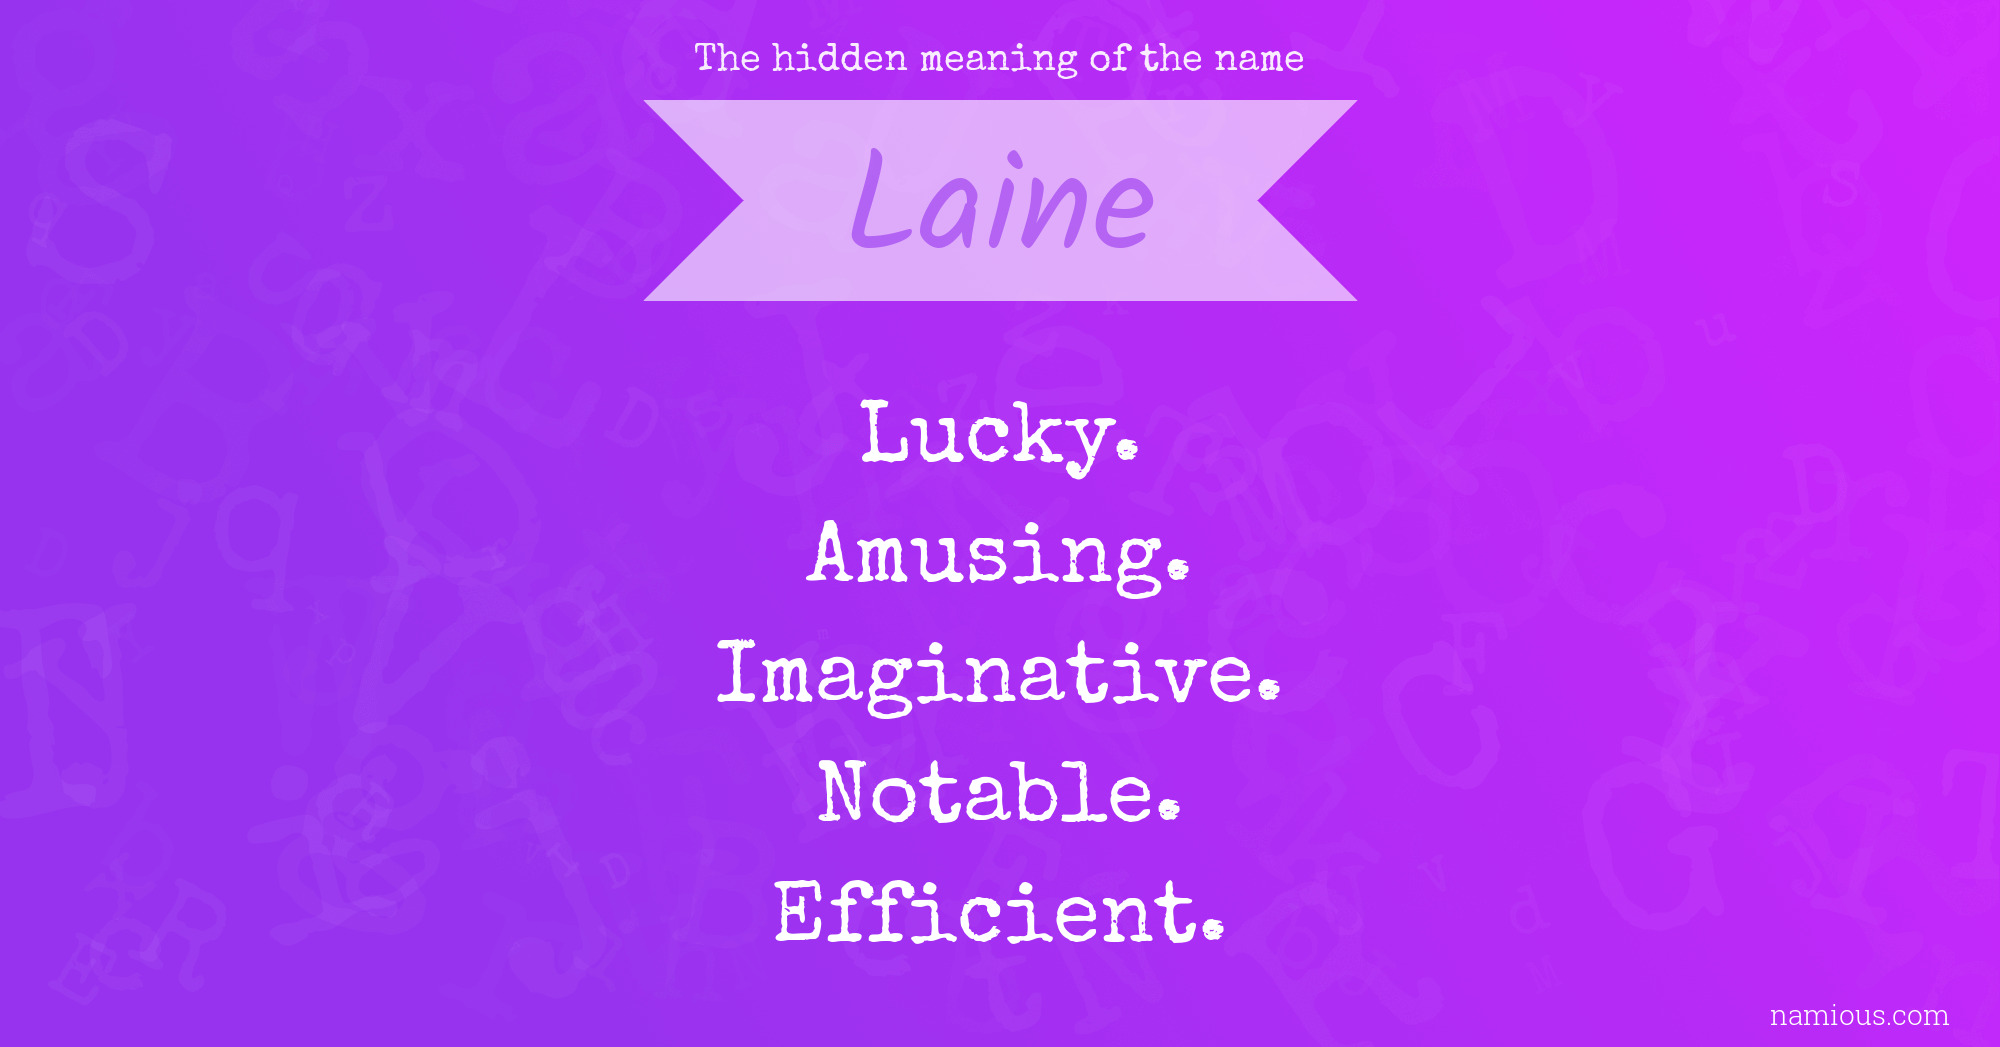 The hidden meaning of the name Laine